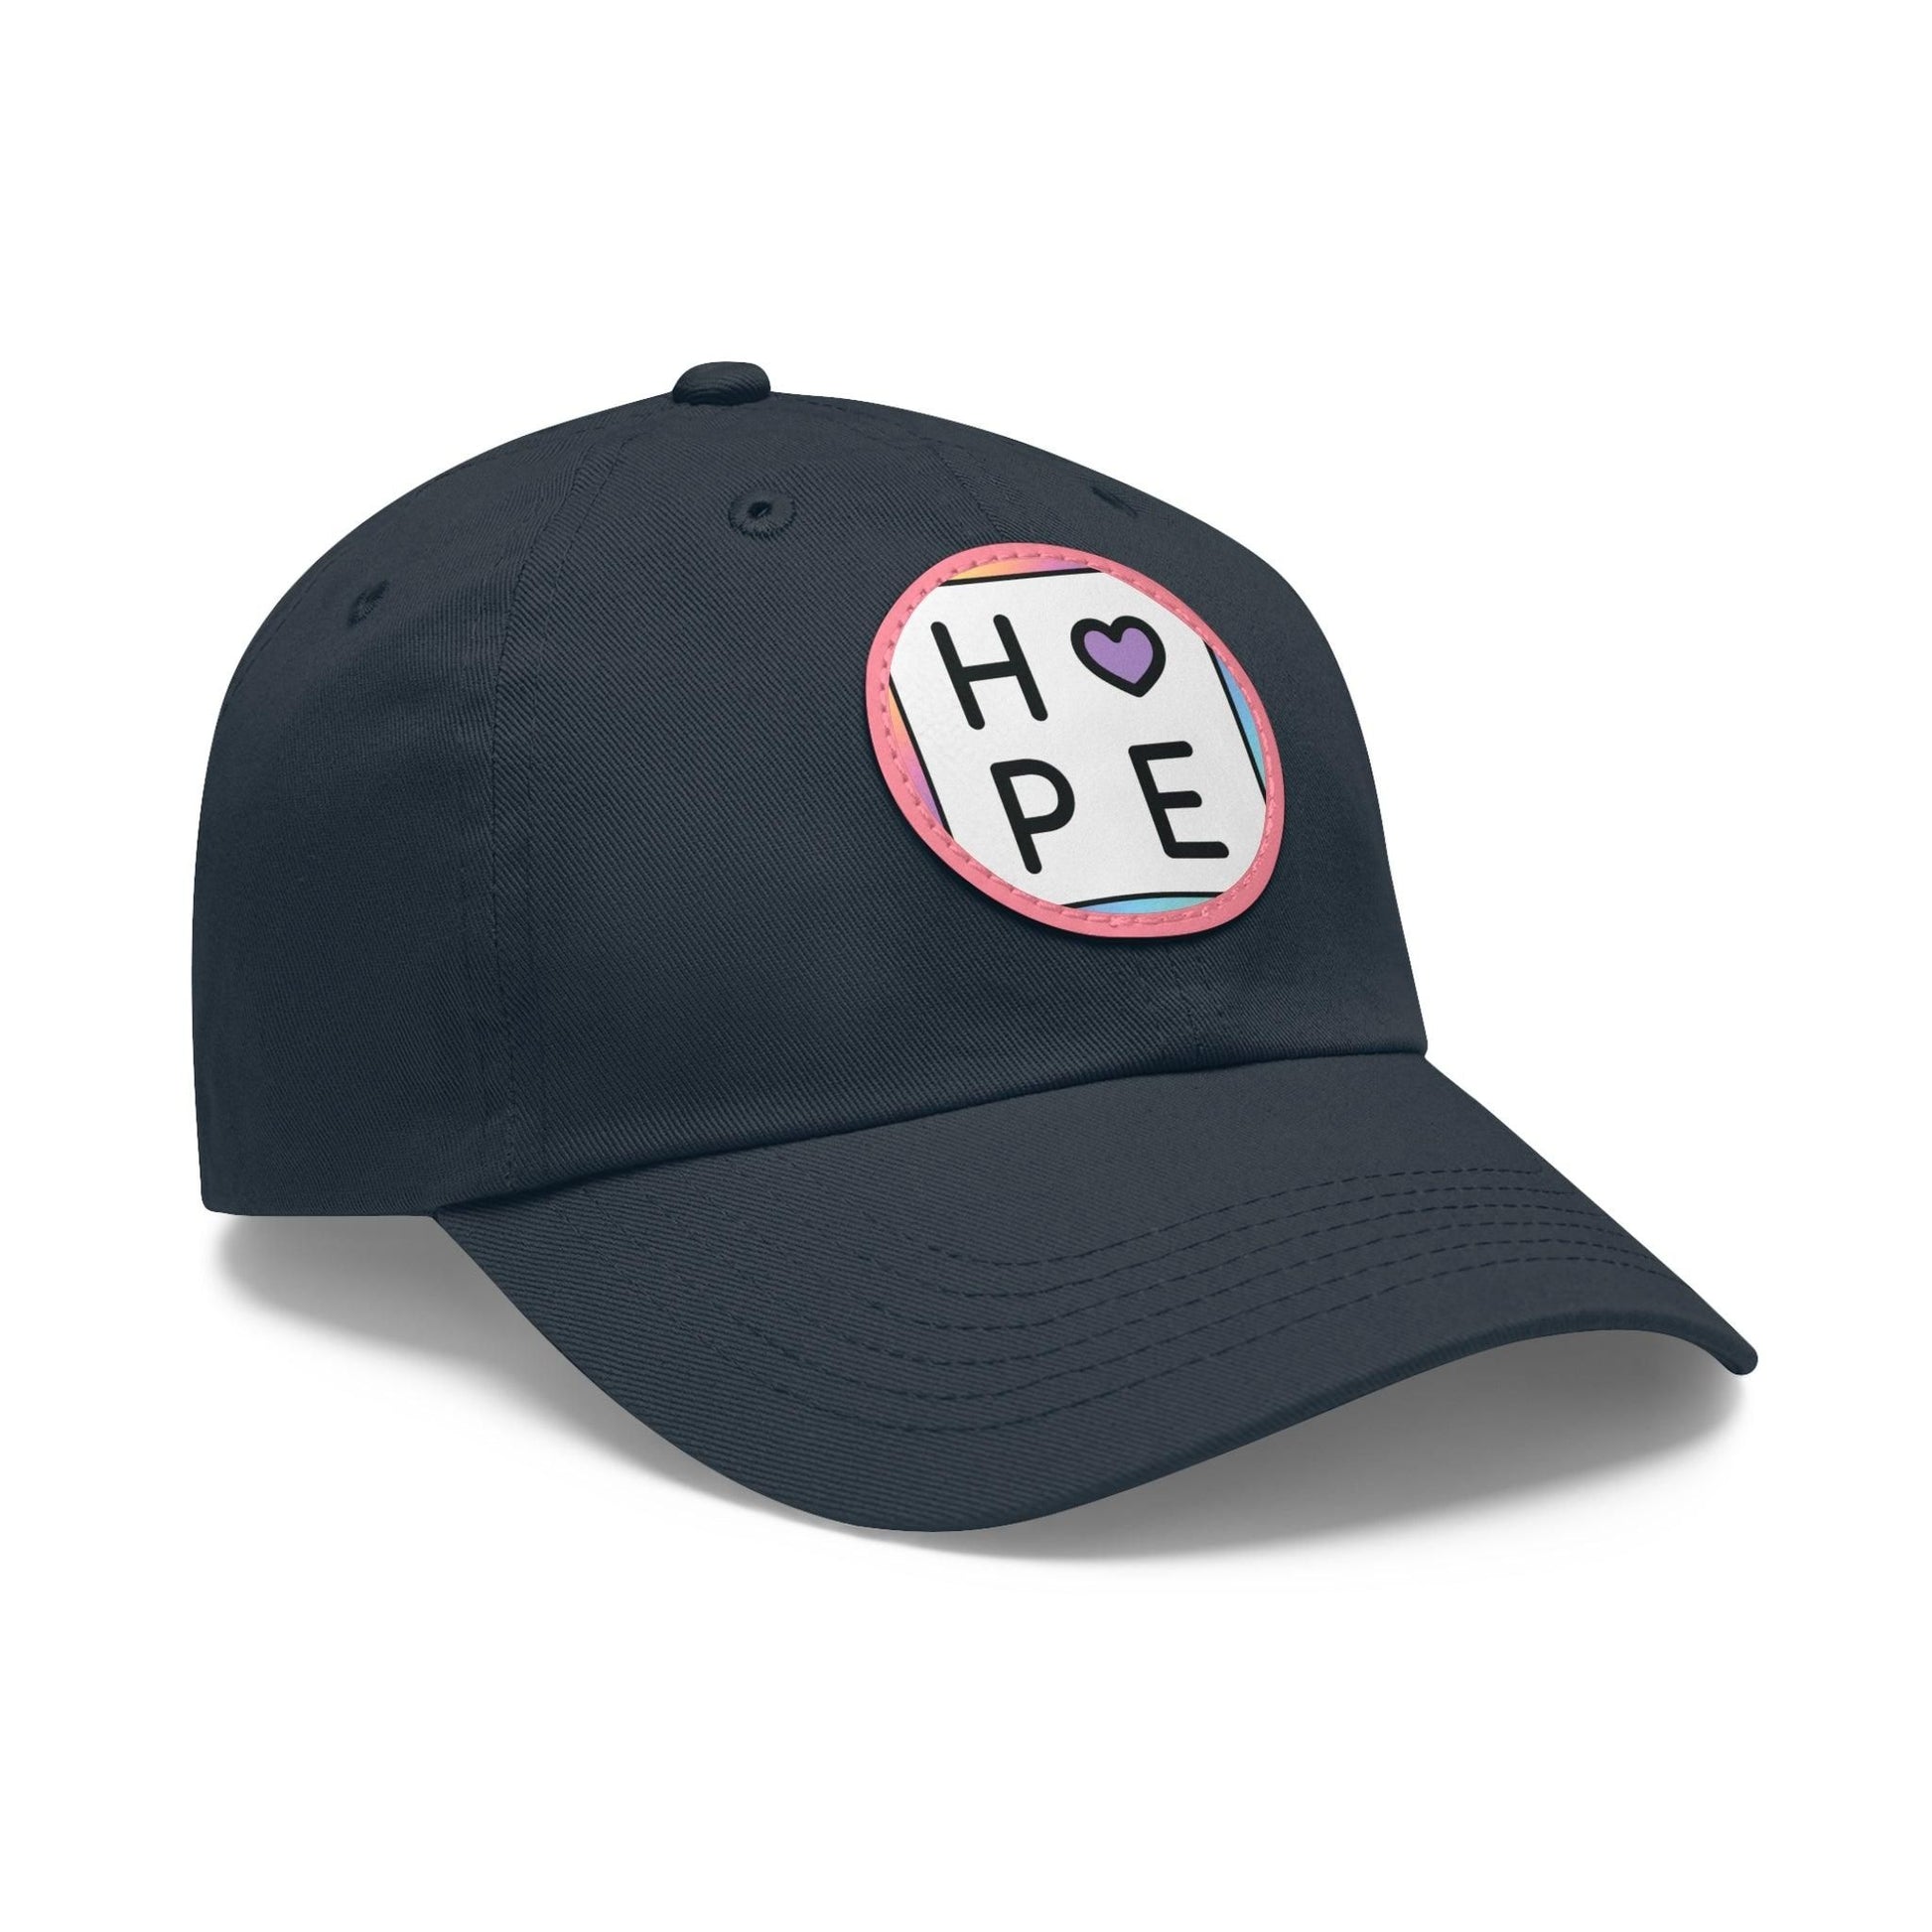 Hope Baseball Cap with Leather Patch Cap Navy / Pink patch Circle One size